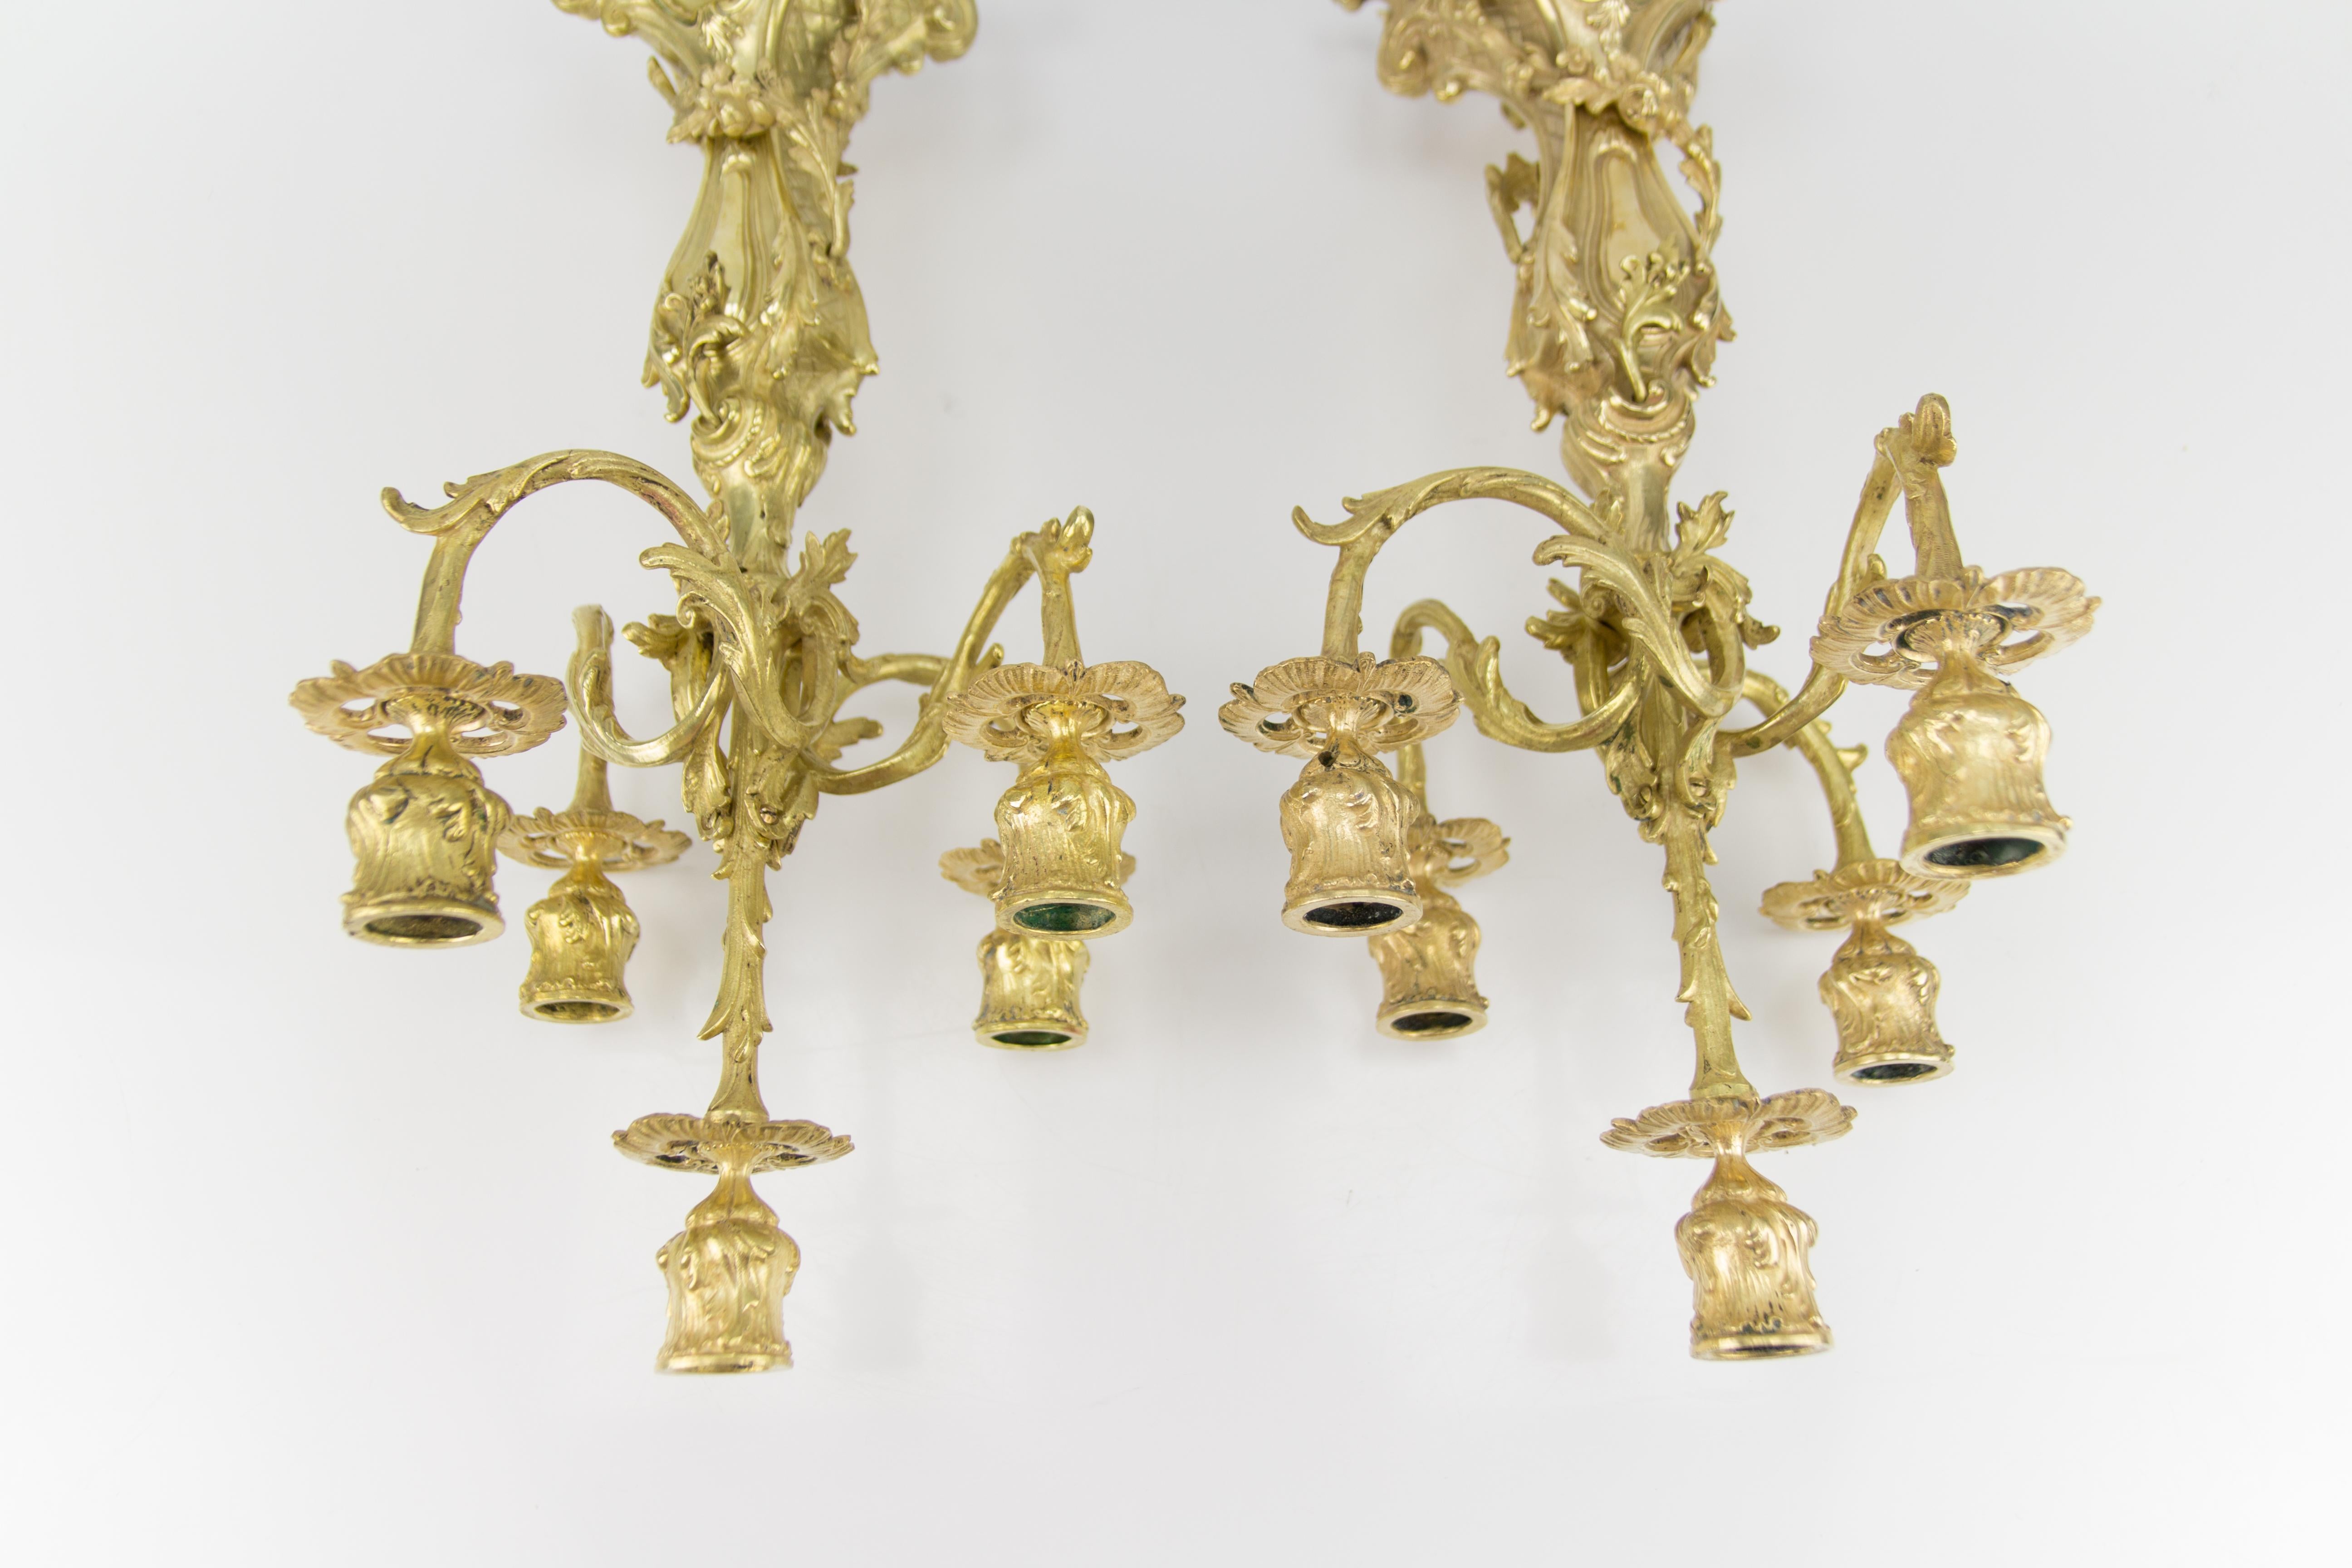 French Louis XV or Rococo Style French Bronze Candelabras with Dolphins, a Pair For Sale 7